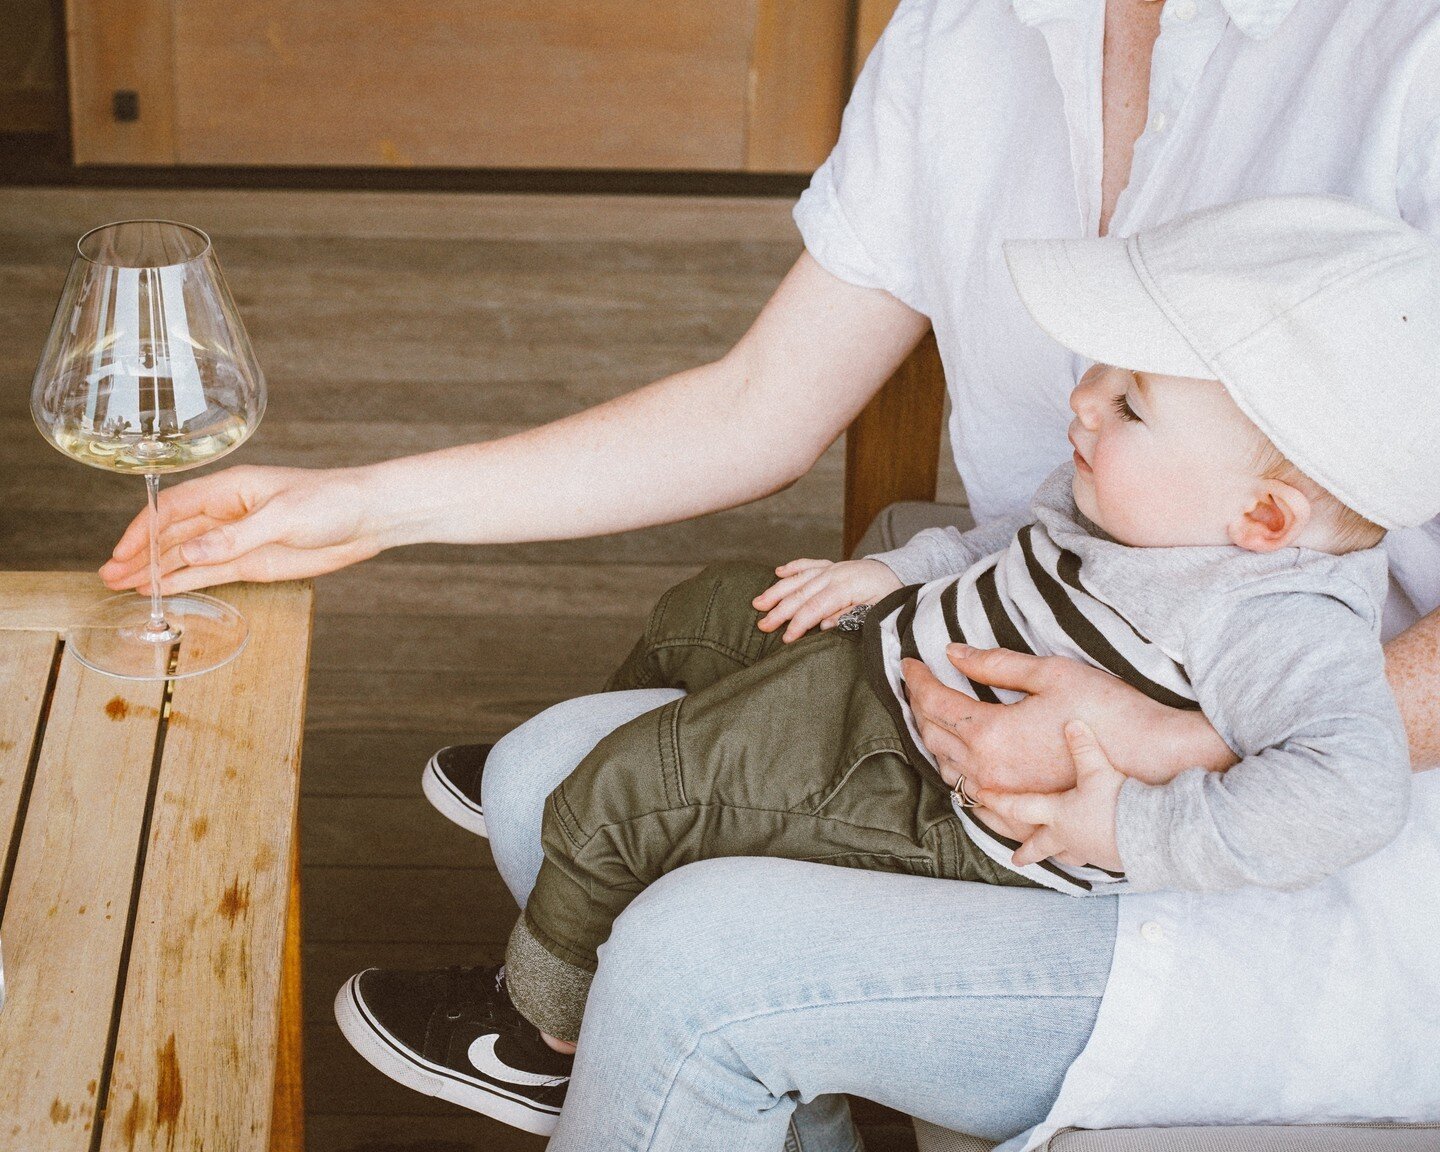 Celebrating all moms ✨⁠
⁠
Join us on Mother's Day and enjoy a splash of Cuv&eacute;e One Sparkling Ros&eacute; from our neighbors at @corollarywines. We only have a few reservations left for tomorrow! Make sure to RSVP quickly to grab yours.⁠
⁠
Looki